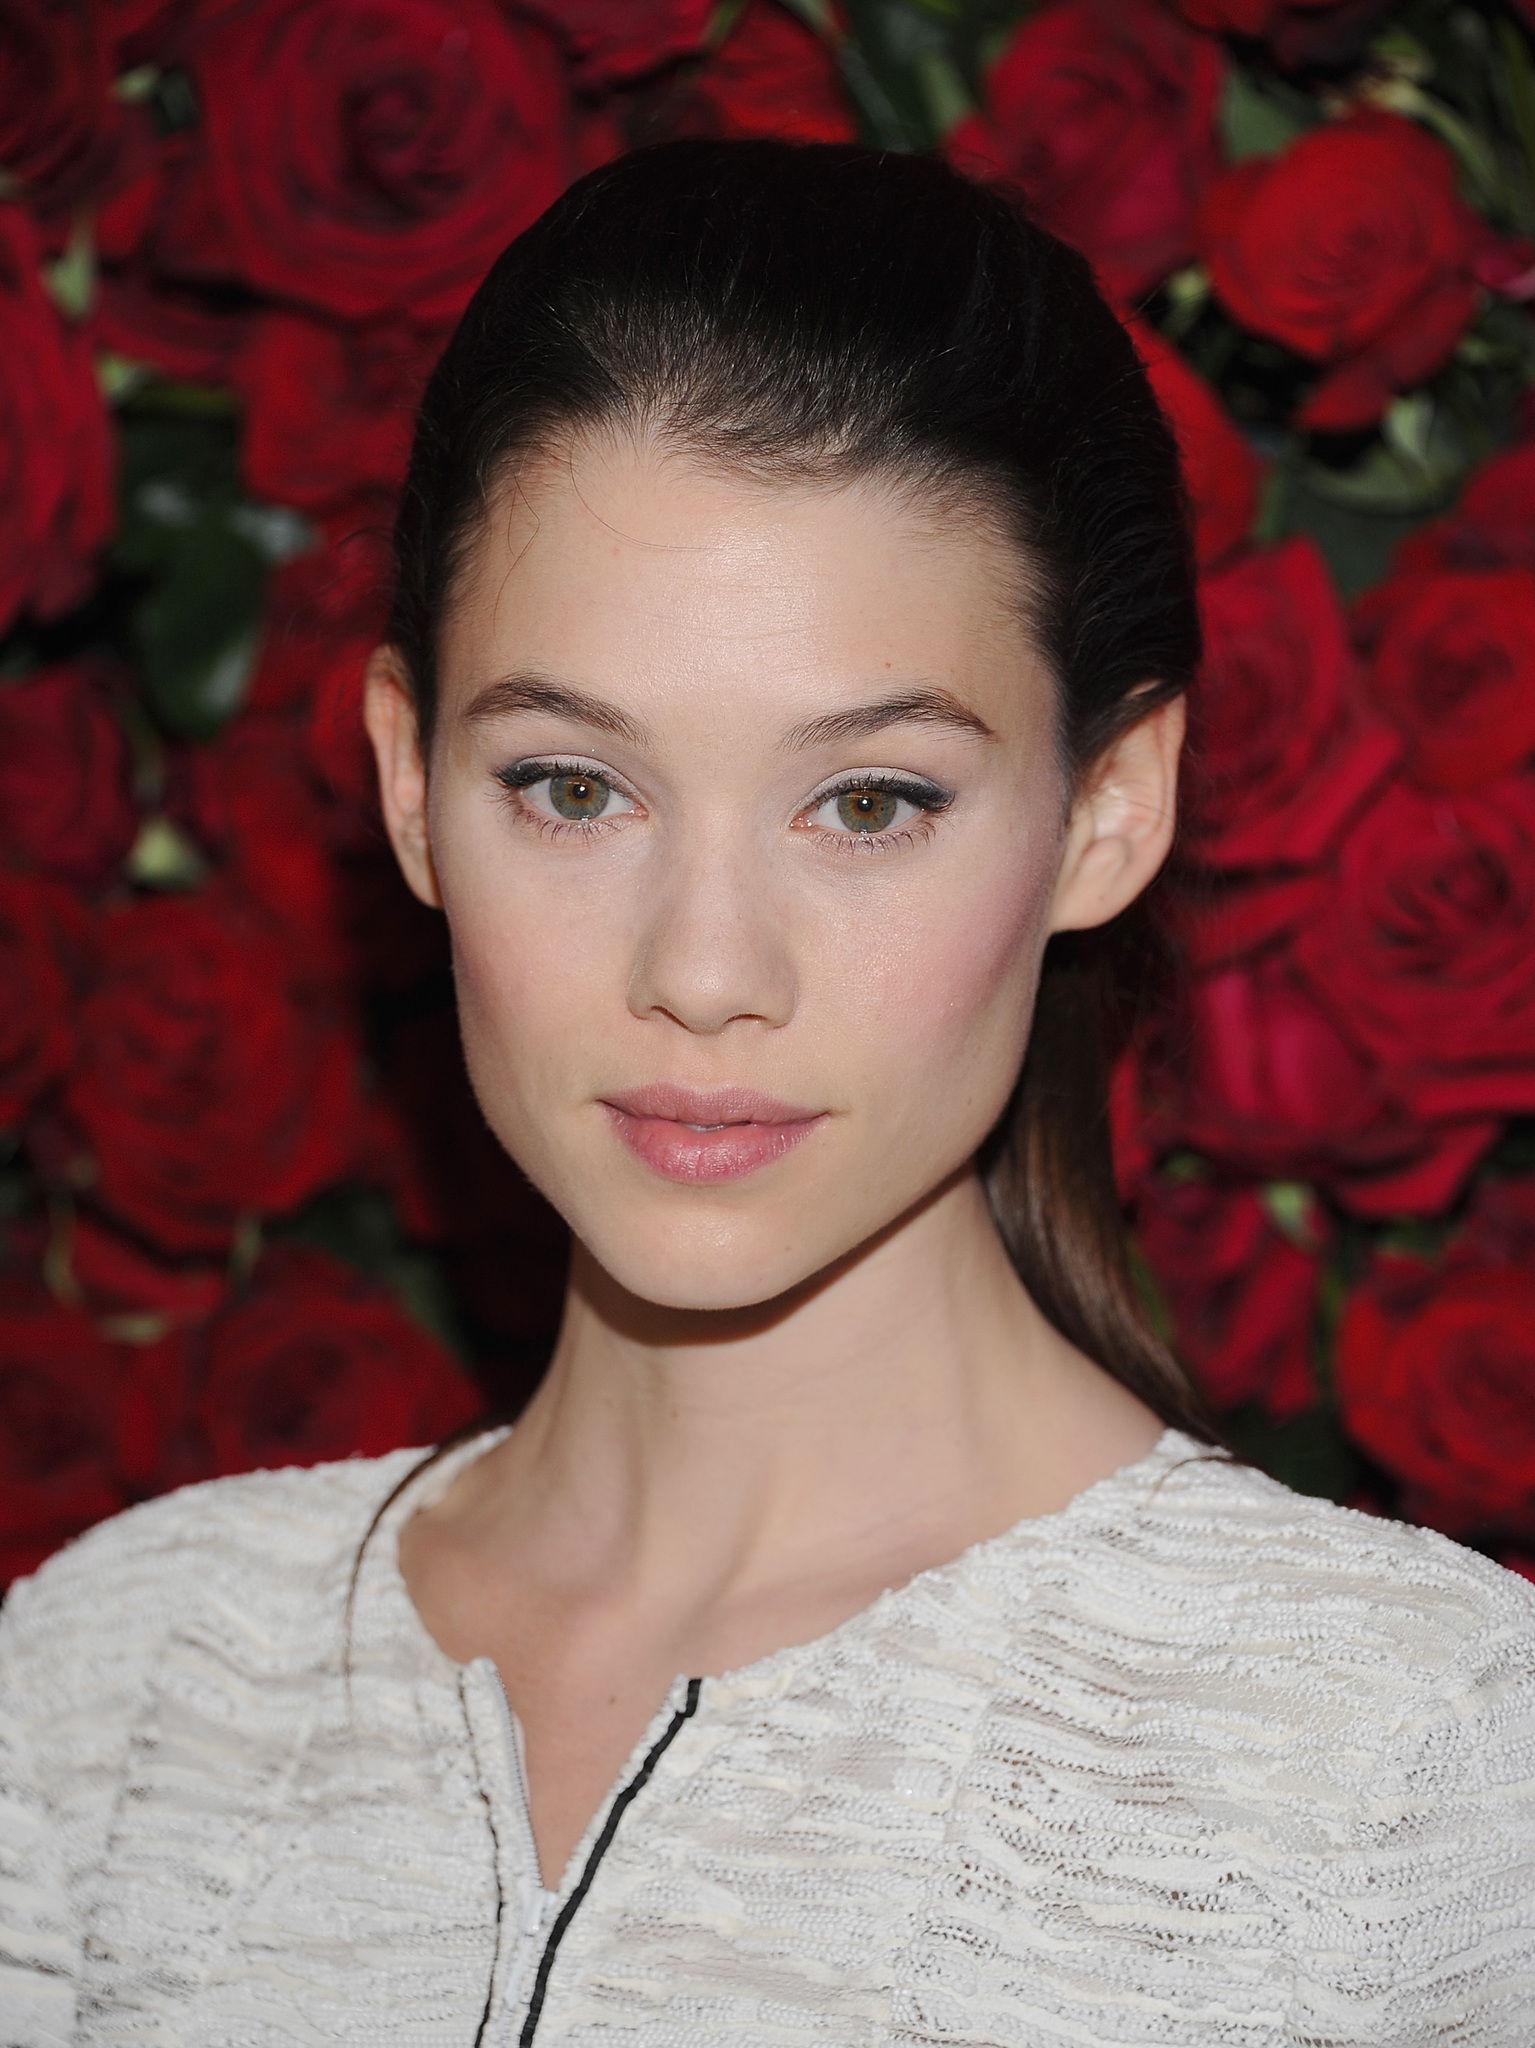 How tall is Astrid Berges Frisbey?